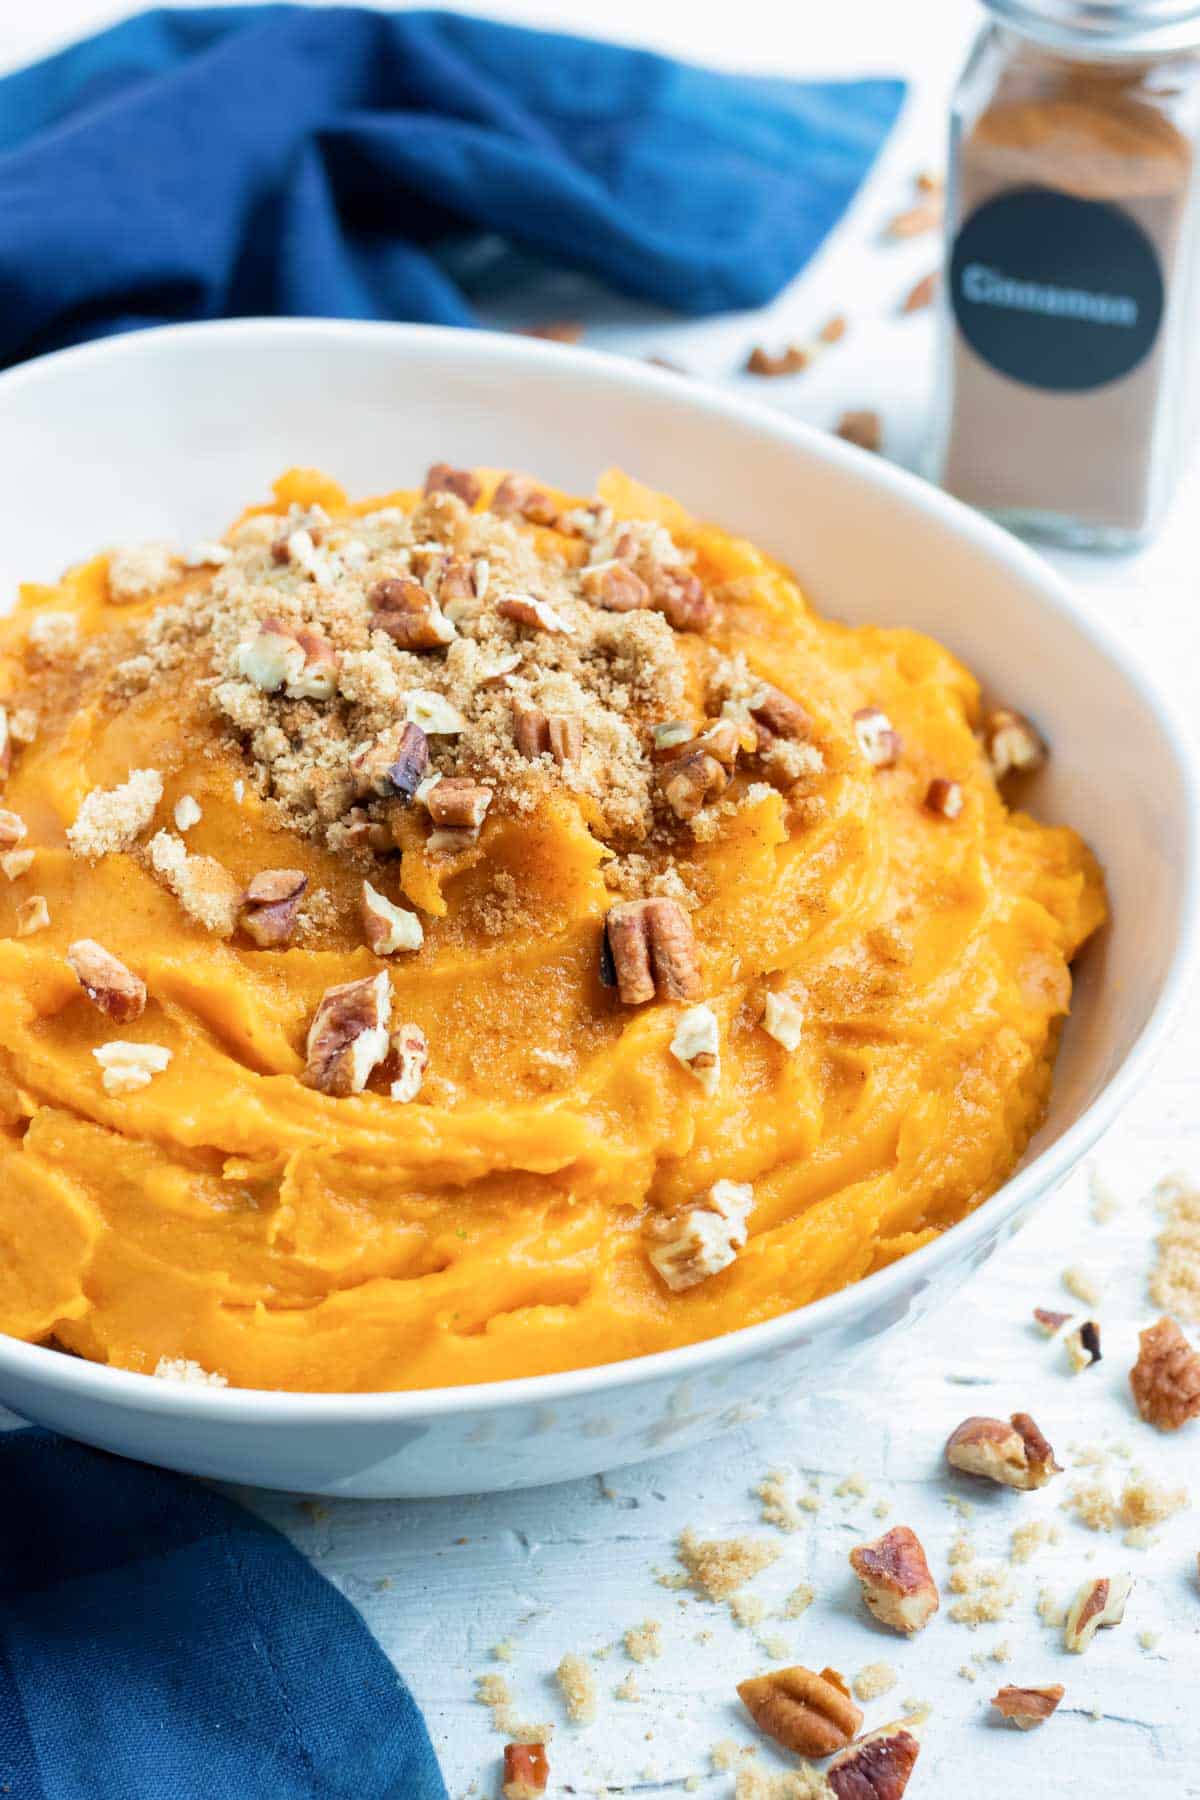 Easy and vegan mashed sweet potatoes recipe with brown sugar, cinnamon, and toasted pecans using Instant Pot potatoes.